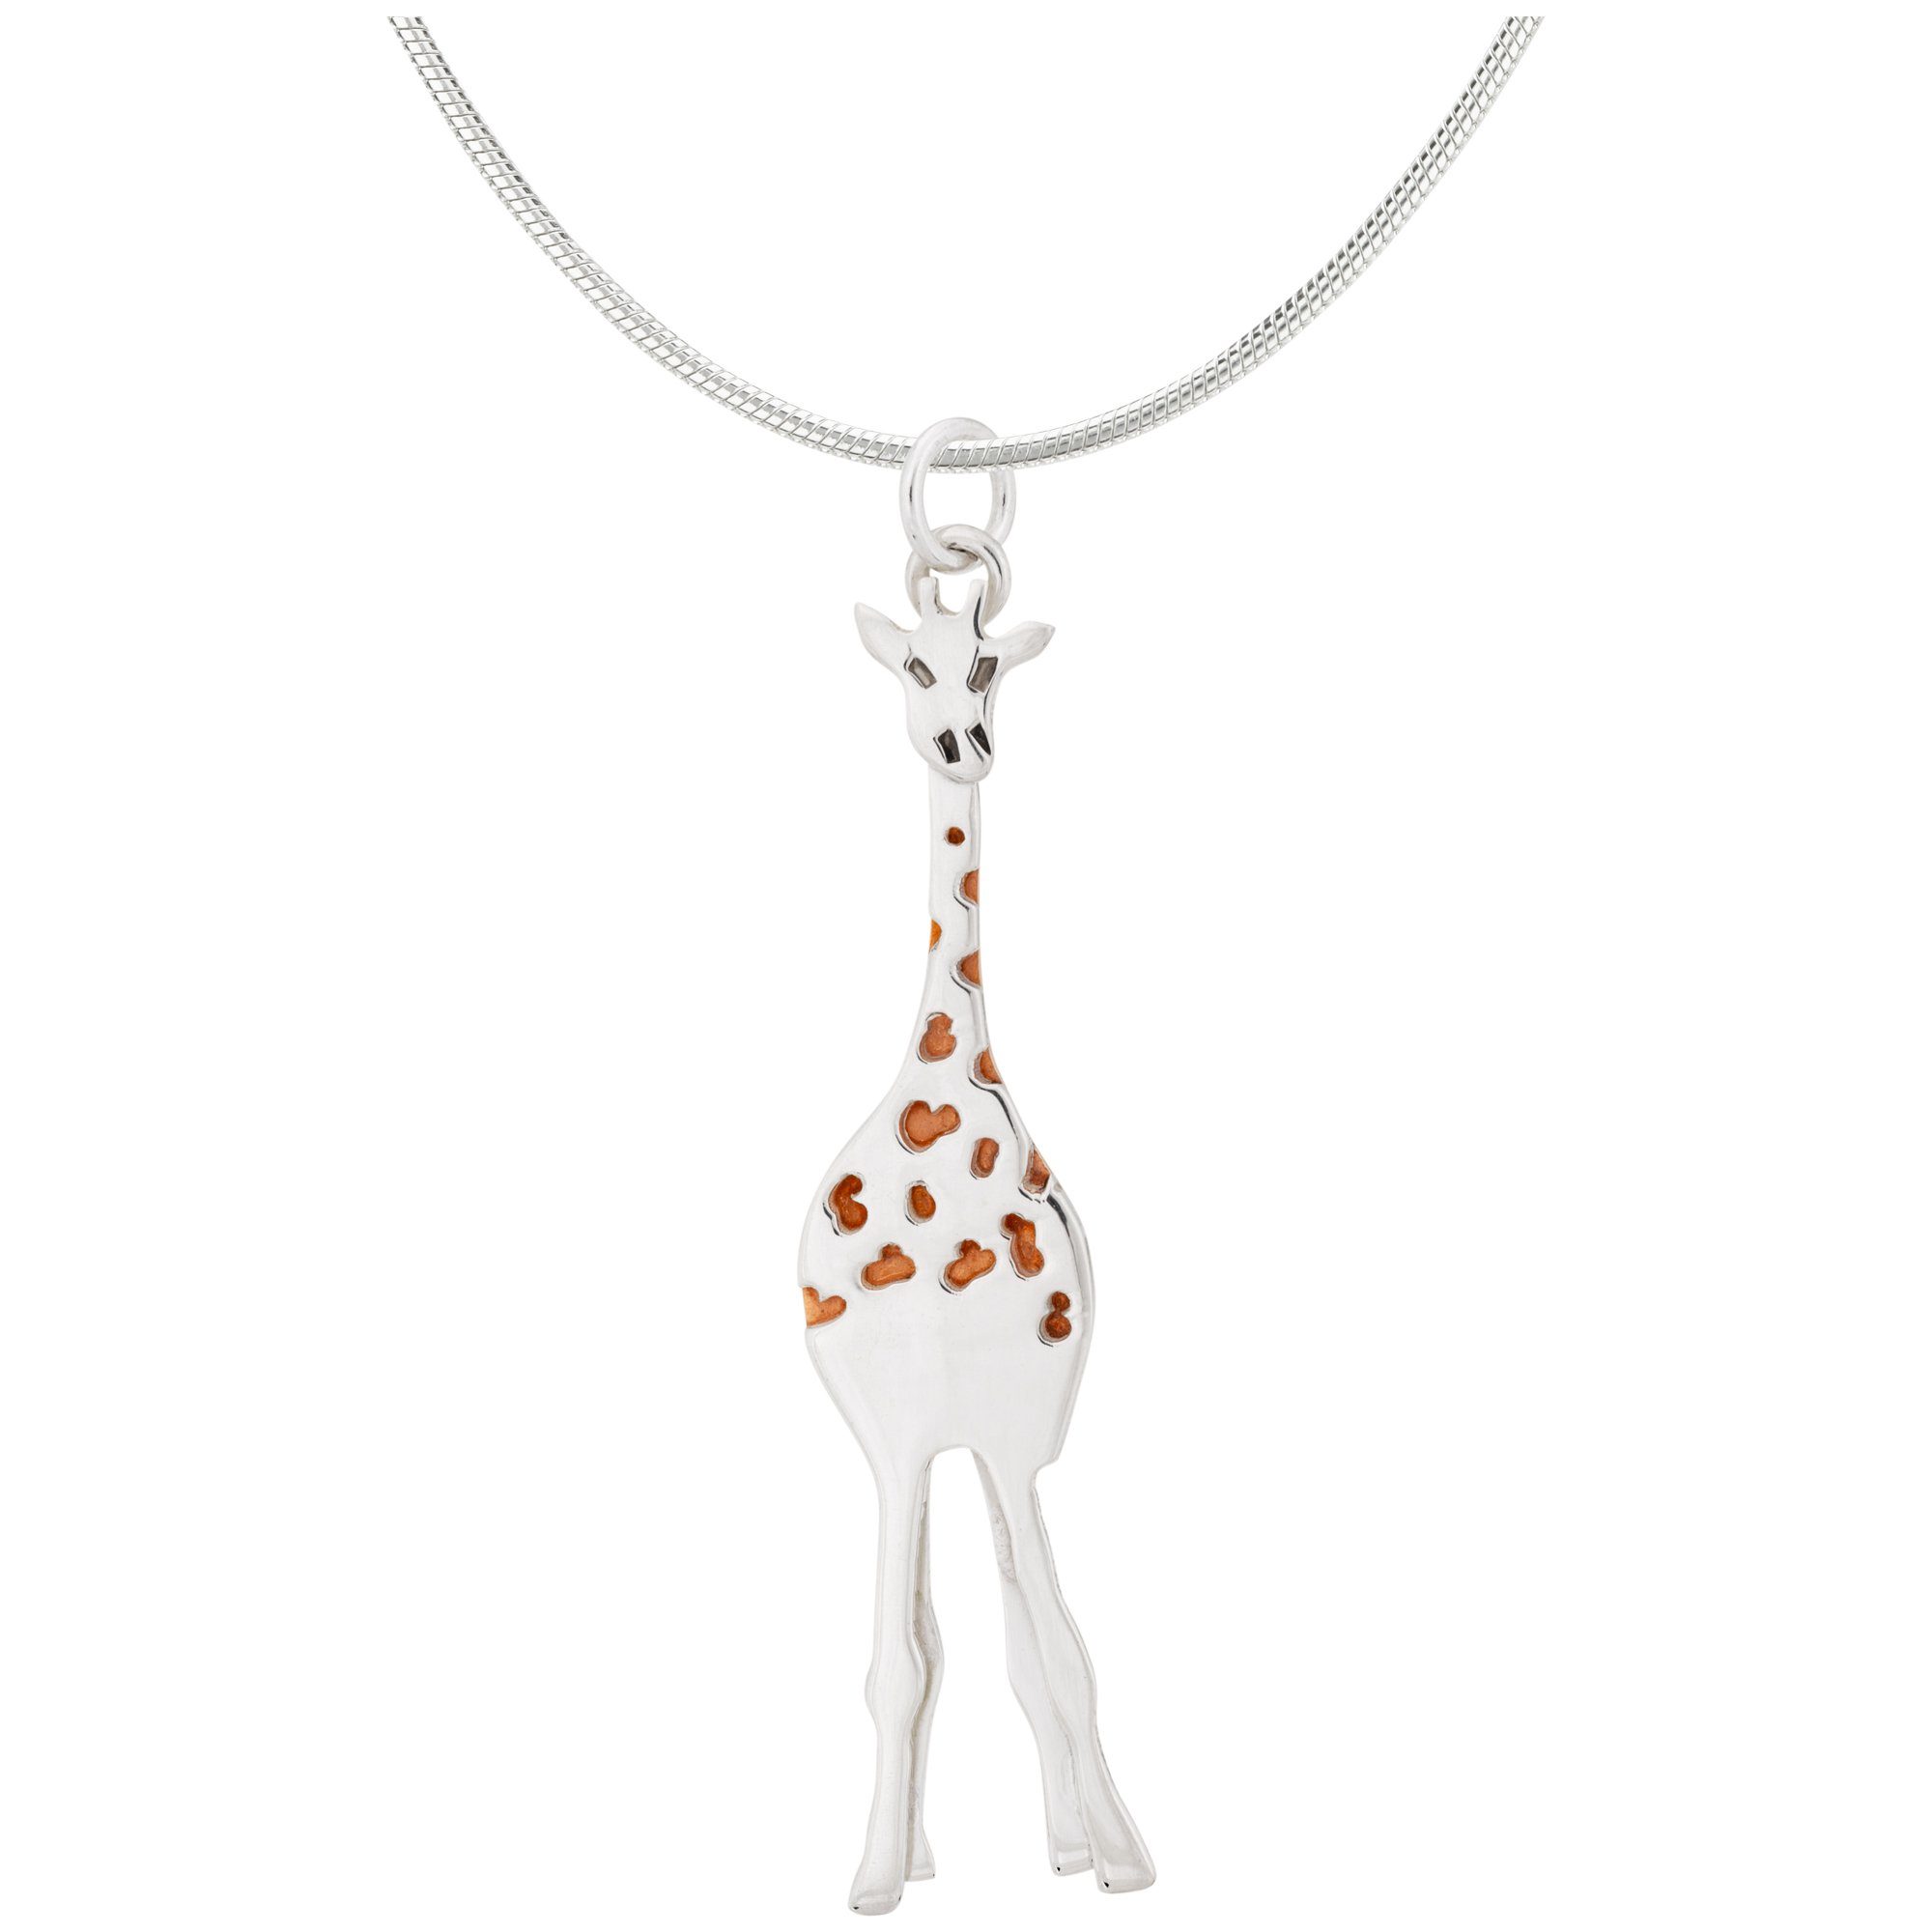 Gentle Giraffe Mixed Metal Necklace - With Diamond Cut Chain